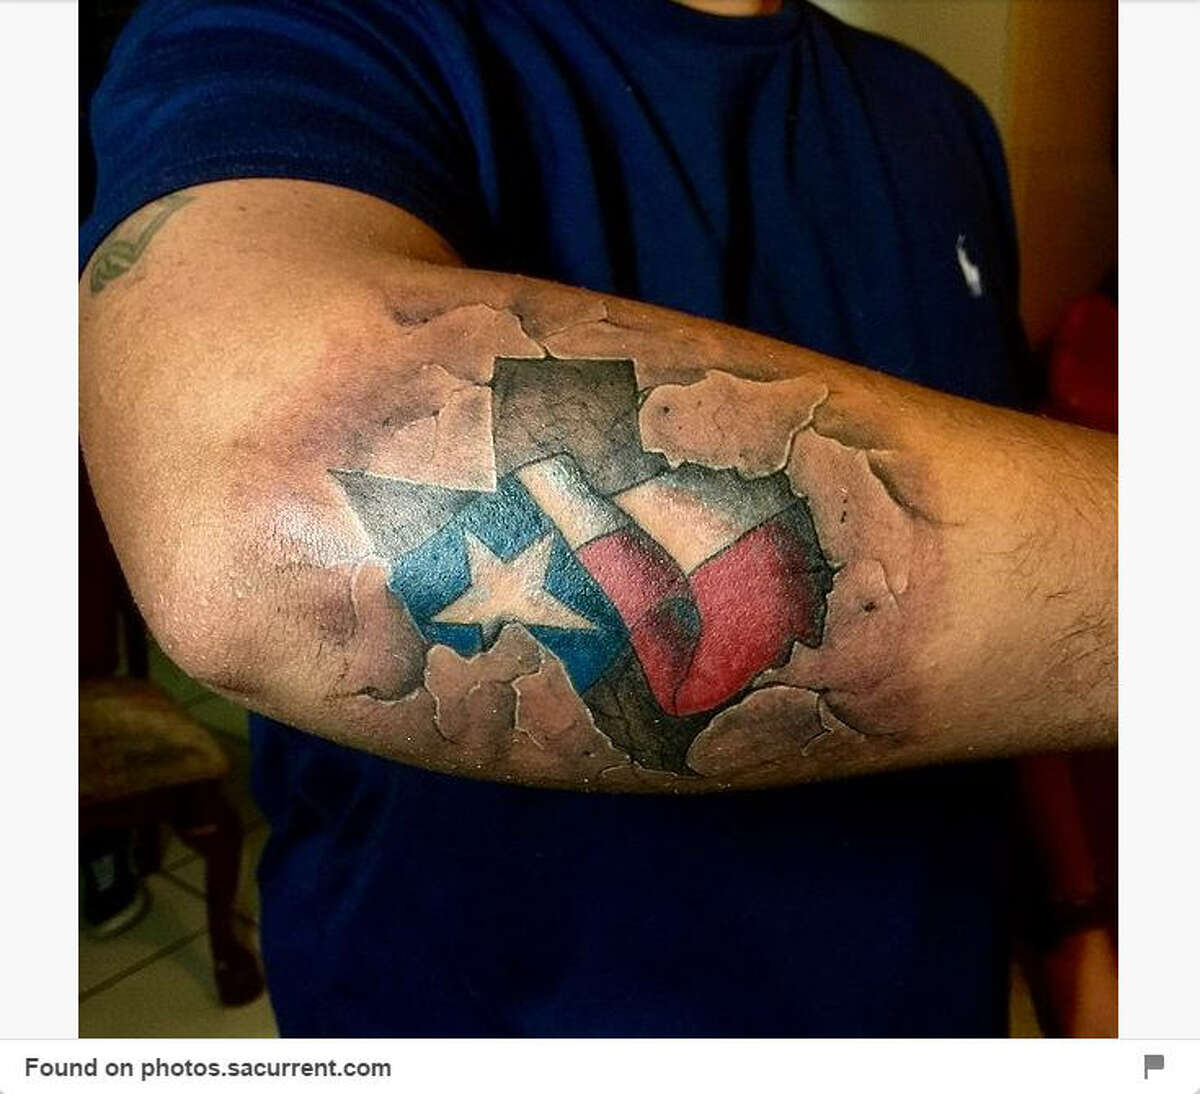 PHOTOS: Texas-themed tattoos that any Texan would love  Texas pride is permanent. And Pinterest has all the creative designs you need to show your state love in ink. Check out these Texas pride tattoos. Click through to get some ideas for your next Texas-themed tattoo...